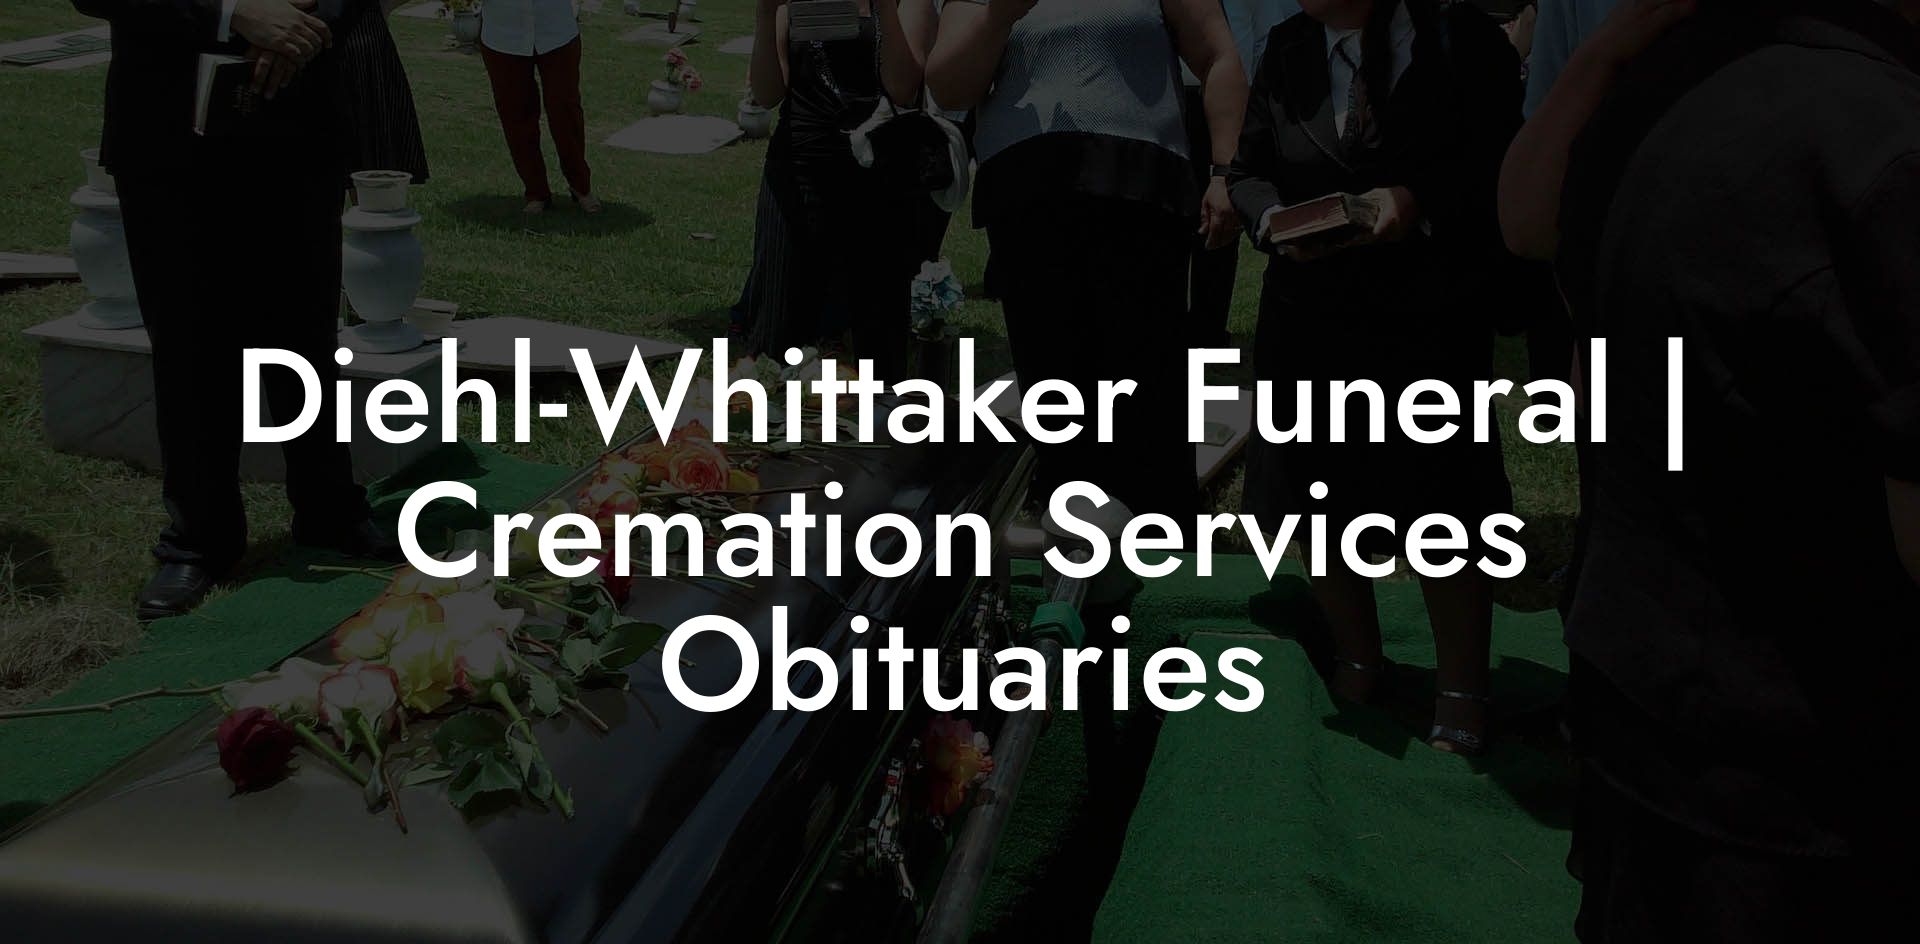 Diehl-Whittaker Funeral | Cremation Services Obituaries